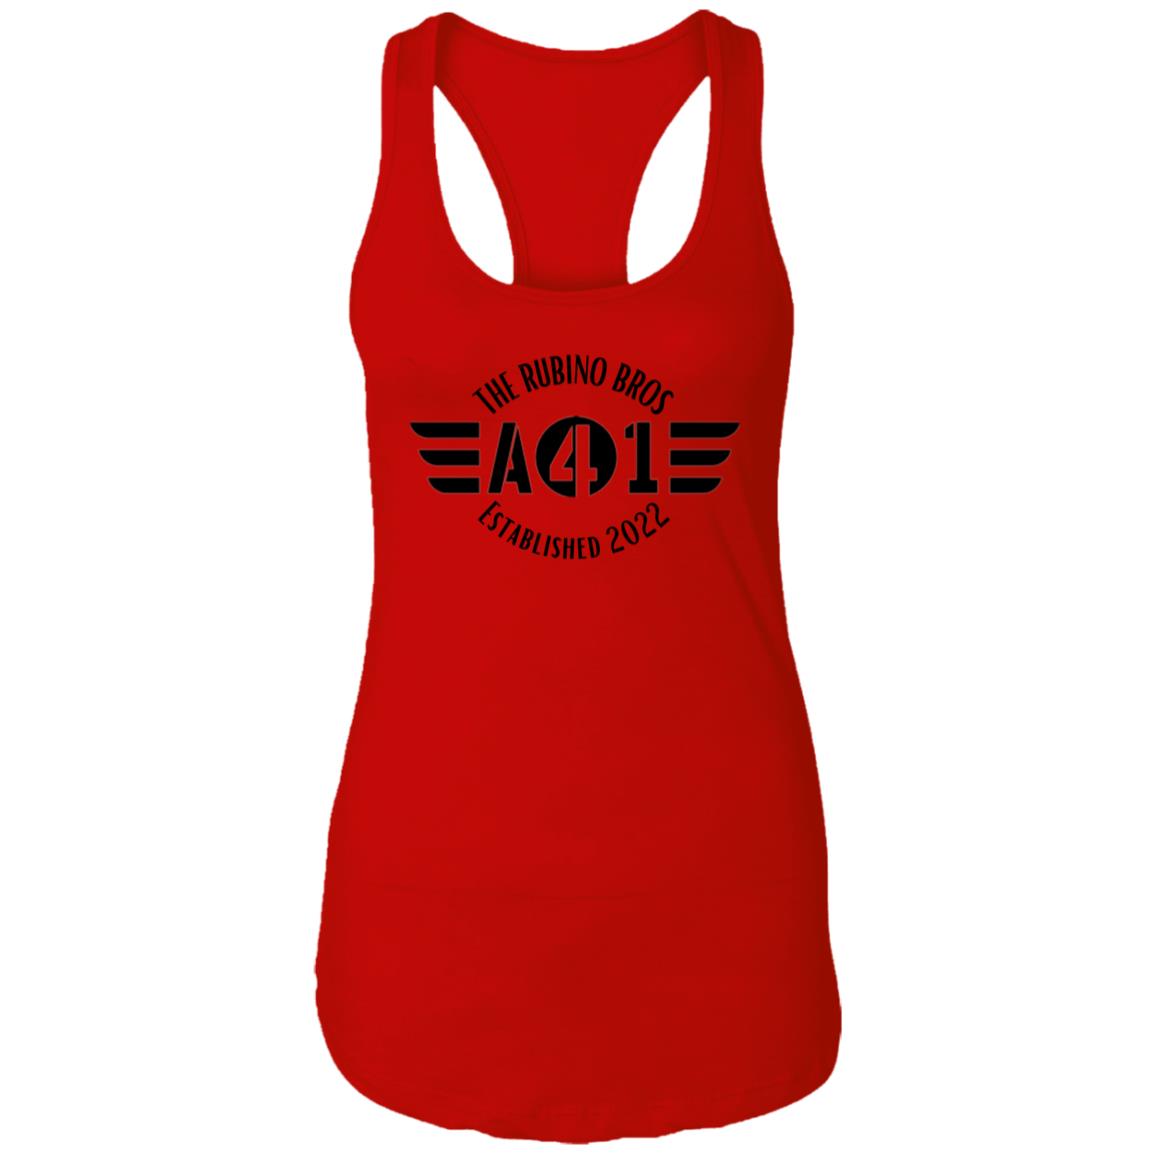 All 4 One Ladies Ideal Racerback Tank